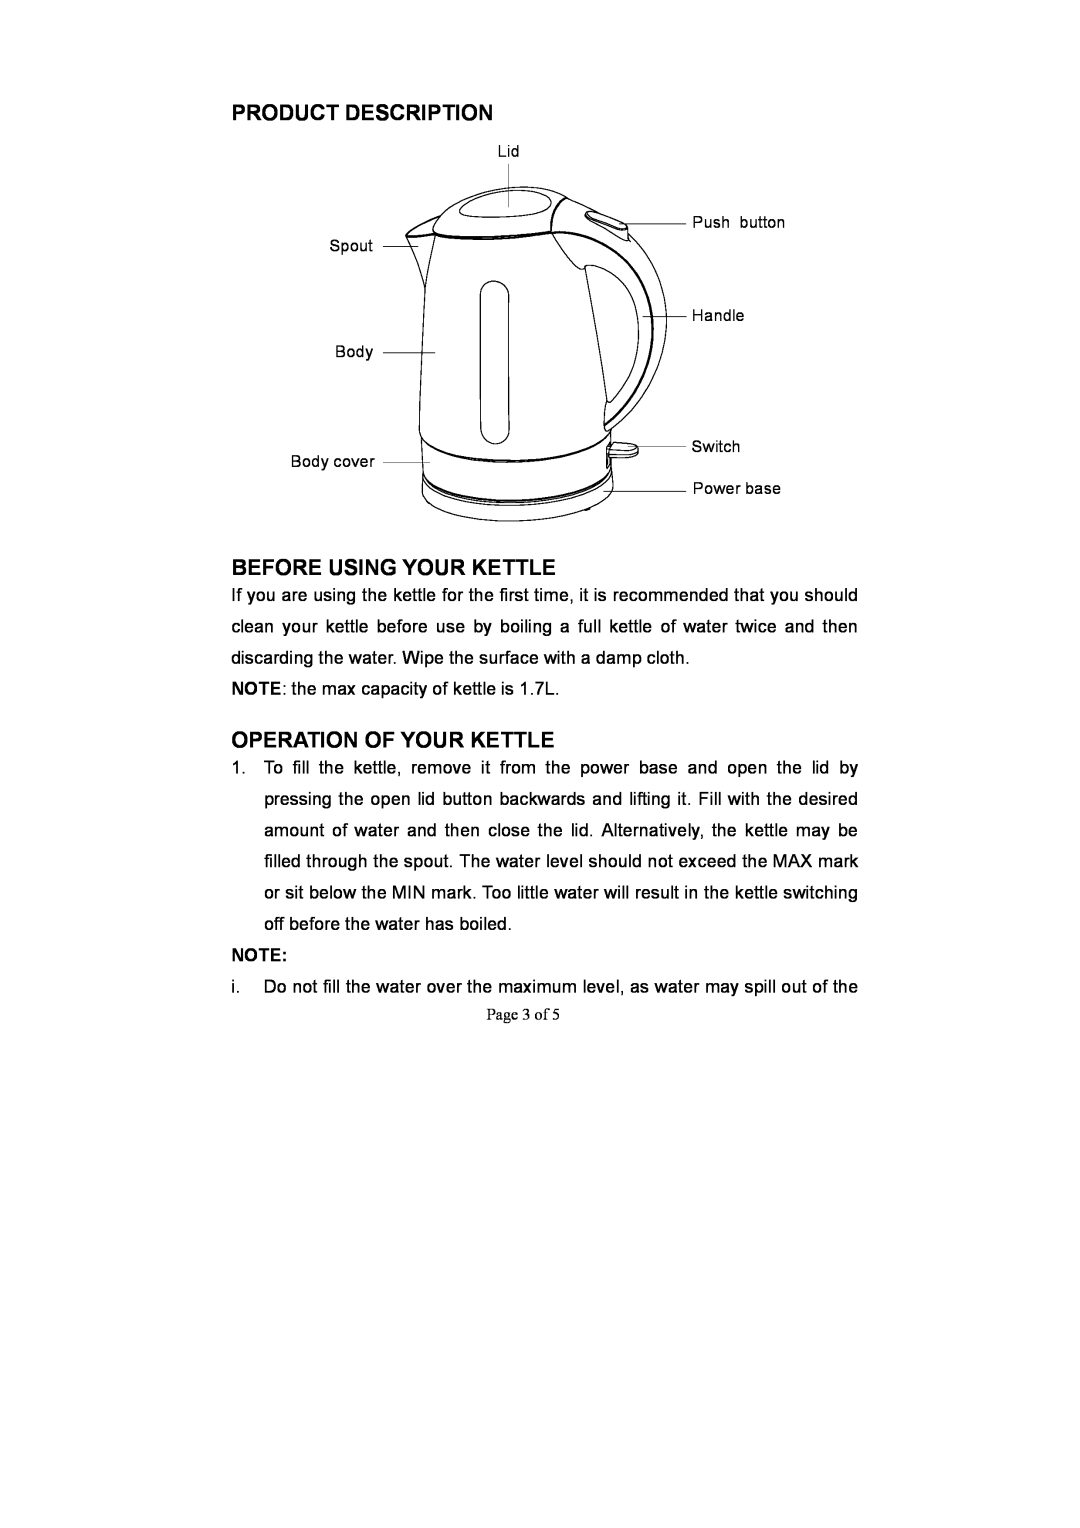 Sharp EKJ-17WH manual Product Description, Before Using Your Kettle, Operation Of Your Kettle 